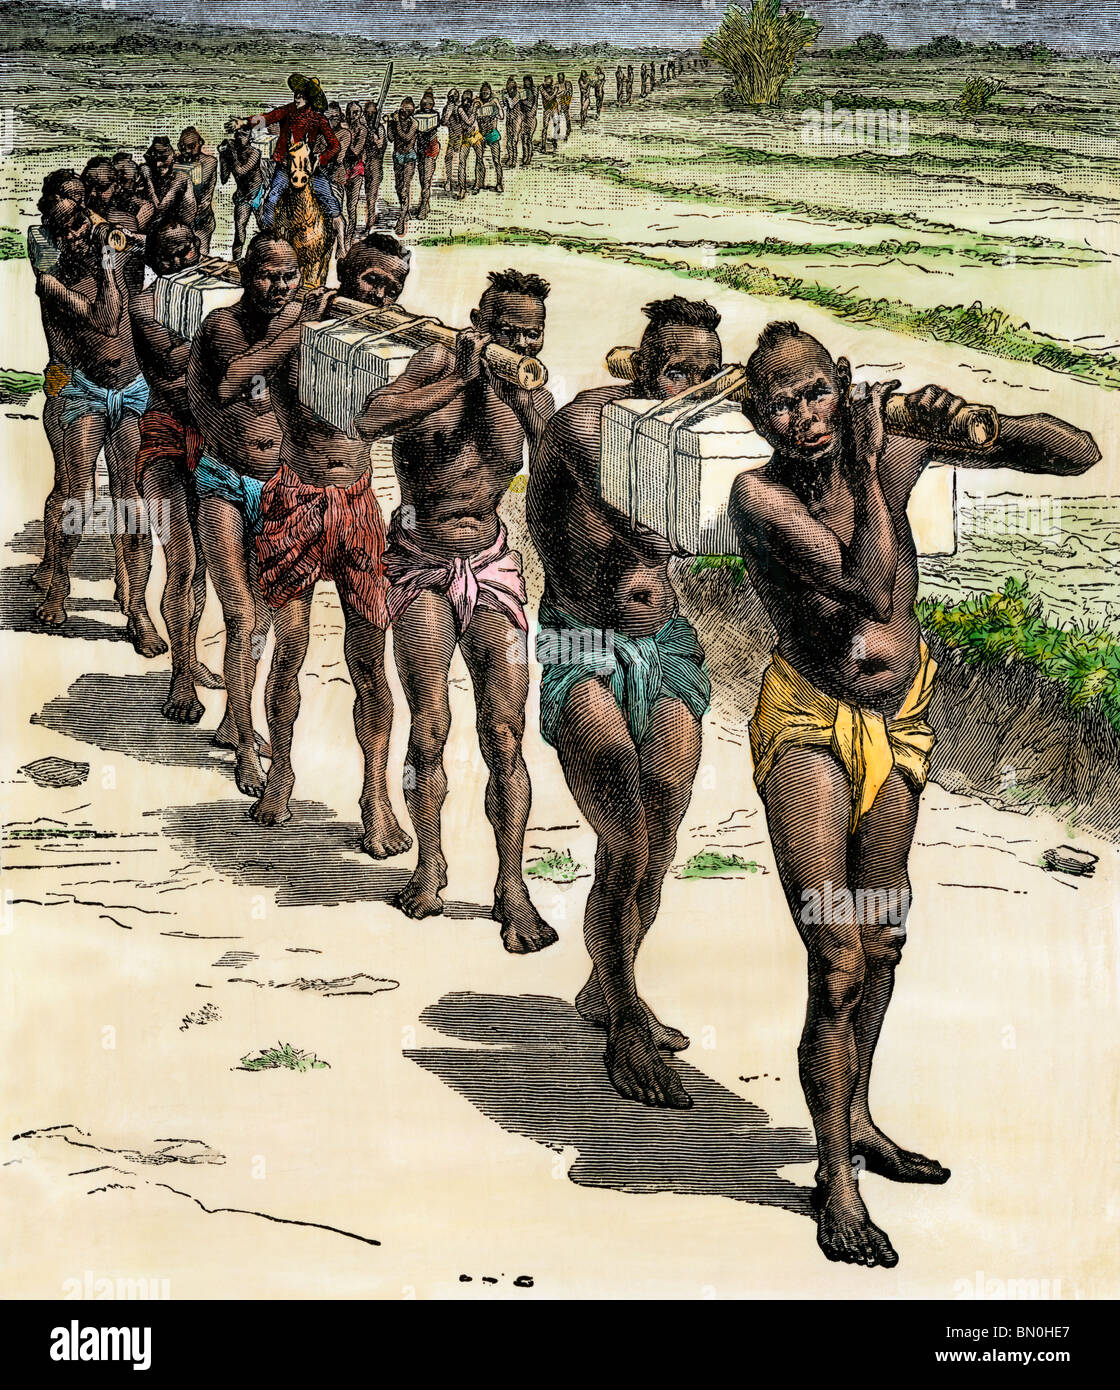 English explorer Richard Burton's march towards central Africa, 1850s. Hand-colored woodcut Stock Photo